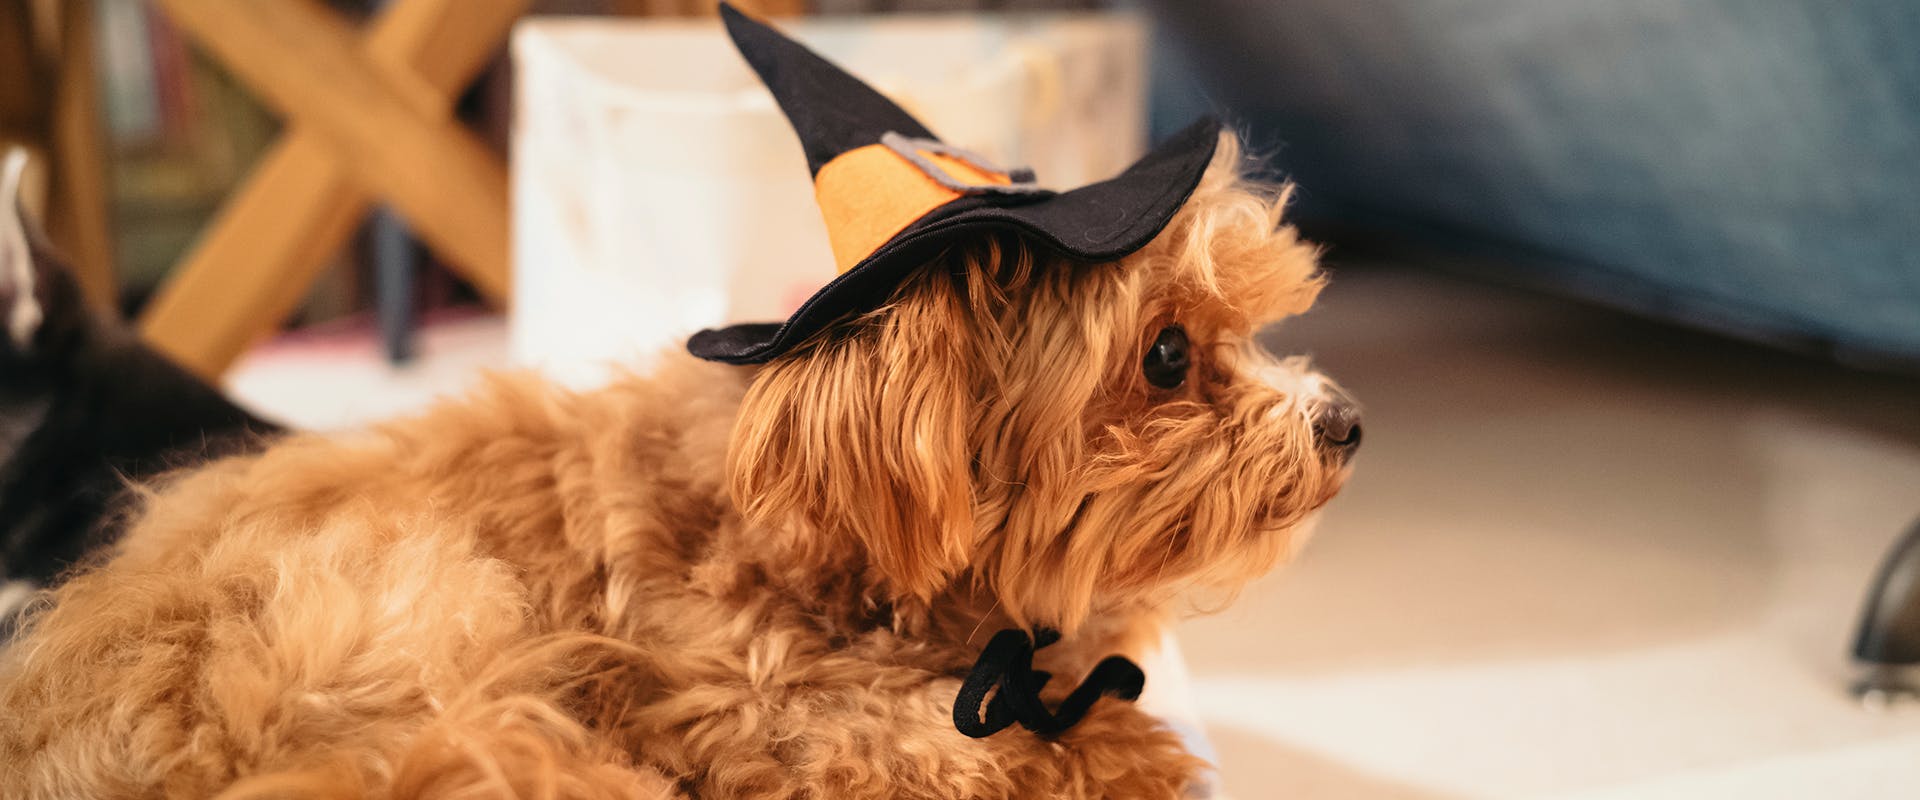 A small dog wearing a witches hat